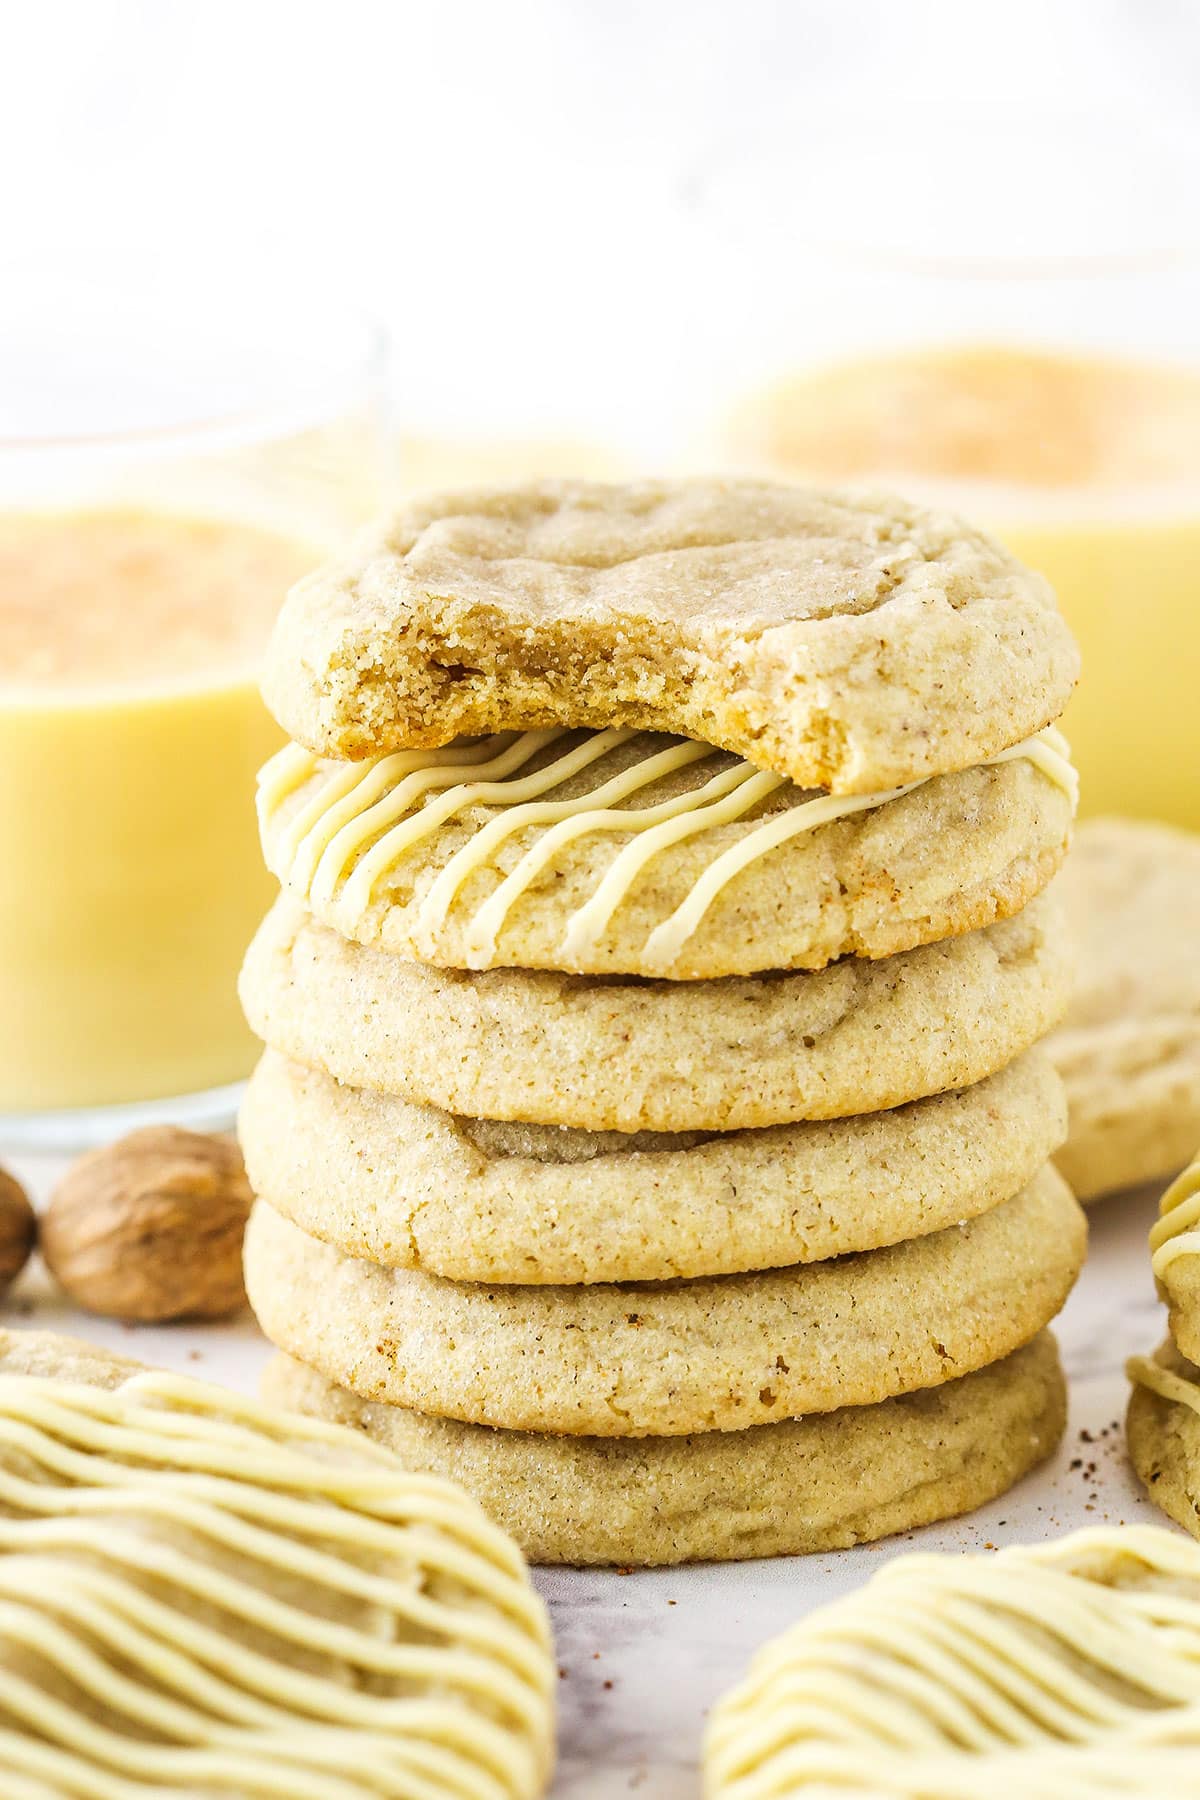 Six Eggnog Cookies stacked with the top cookie missing a bite.